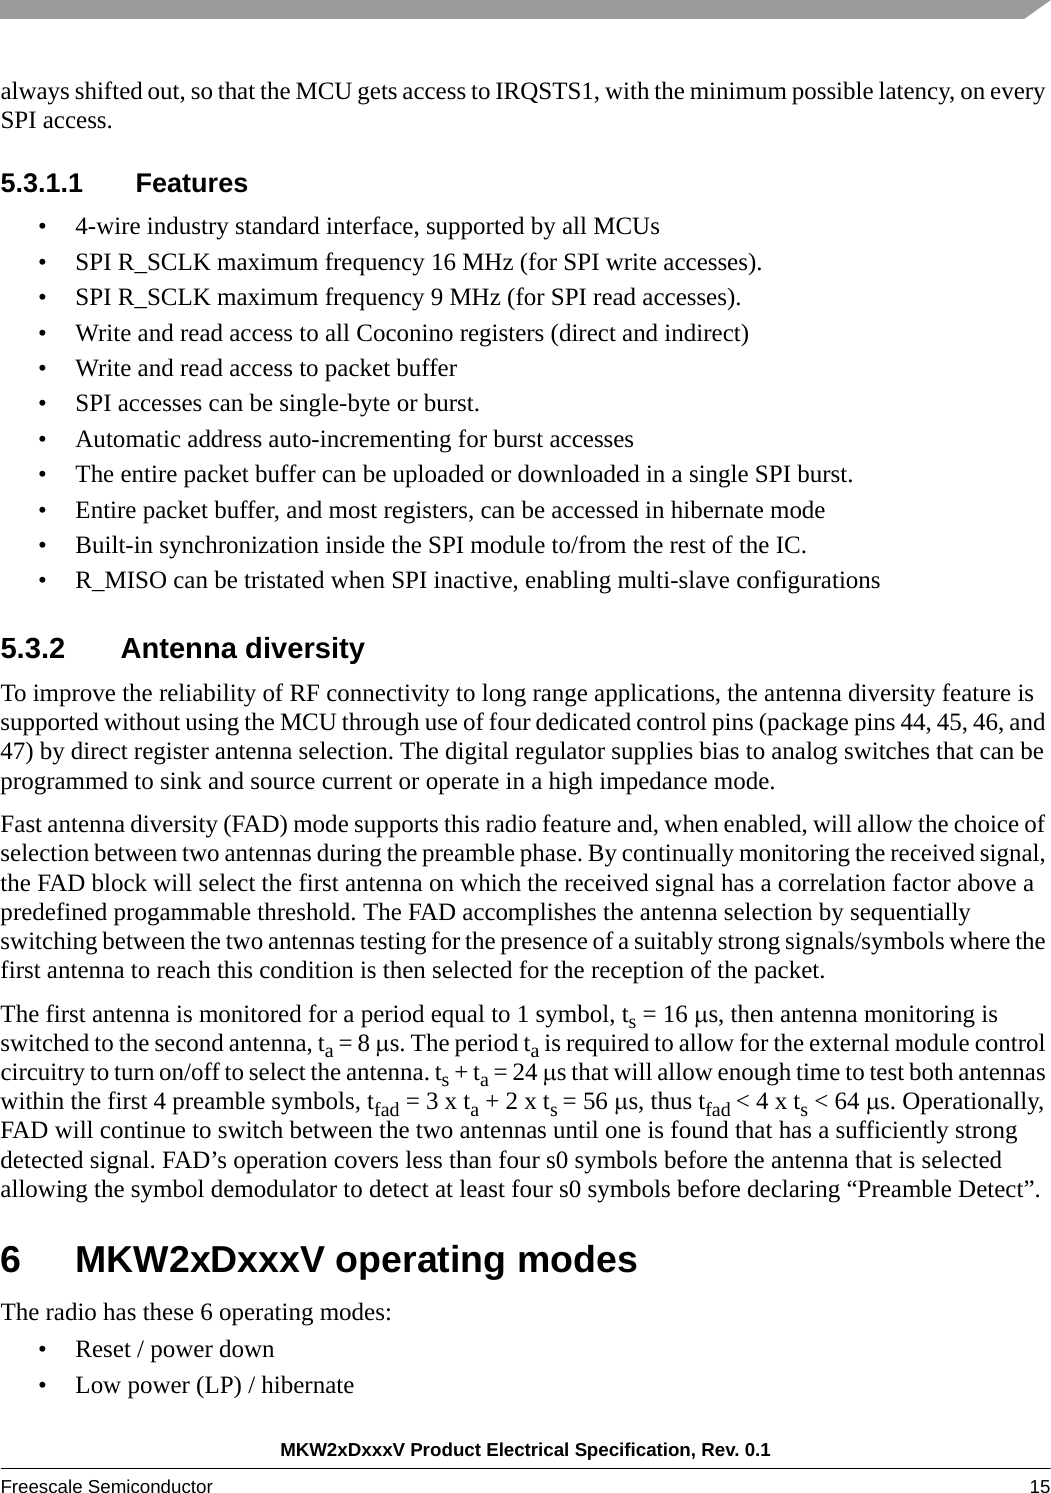 MKW2xDxxxV Product Electrical Specification, Rev. 0.1Freescale Semiconductor 15 always shifted out, so that the MCU gets access to IRQSTS1, with the minimum possible latency, on every SPI access.5.3.1.1 Features• 4-wire industry standard interface, supported by all MCUs• SPI R_SCLK maximum frequency 16 MHz (for SPI write accesses).• SPI R_SCLK maximum frequency 9 MHz (for SPI read accesses).• Write and read access to all Coconino registers (direct and indirect)• Write and read access to packet buffer• SPI accesses can be single-byte or burst.• Automatic address auto-incrementing for burst accesses• The entire packet buffer can be uploaded or downloaded in a single SPI burst.• Entire packet buffer, and most registers, can be accessed in hibernate mode• Built-in synchronization inside the SPI module to/from the rest of the IC.• R_MISO can be tristated when SPI inactive, enabling multi-slave configurations5.3.2 Antenna diversityTo improve the reliability of RF connectivity to long range applications, the antenna diversity feature is supported without using the MCU through use of four dedicated control pins (package pins 44, 45, 46, and 47) by direct register antenna selection. The digital regulator supplies bias to analog switches that can be programmed to sink and source current or operate in a high impedance mode.Fast antenna diversity (FAD) mode supports this radio feature and, when enabled, will allow the choice of selection between two antennas during the preamble phase. By continually monitoring the received signal, the FAD block will select the first antenna on which the received signal has a correlation factor above a predefined progammable threshold. The FAD accomplishes the antenna selection by sequentially switching between the two antennas testing for the presence of a suitably strong signals/symbols where the first antenna to reach this condition is then selected for the reception of the packet.The first antenna is monitored for a period equal to 1 symbol, ts = 16 s, then antenna monitoring is switched to the second antenna, ta = 8 s. The period ta is required to allow for the external module control circuitry to turn on/off to select the antenna. ts + ta = 24 s that will allow enough time to test both antennas within the first 4 preamble symbols, tfad = 3 x ta + 2 x ts = 56 s, thus tfad &lt; 4 x ts &lt; 64 s. Operationally, FAD will continue to switch between the two antennas until one is found that has a sufficiently strong detected signal. FAD’s operation covers less than four s0 symbols before the antenna that is selected allowing the symbol demodulator to detect at least four s0 symbols before declaring “Preamble Detect”.6 MKW2xDxxxV operating modesThe radio has these 6 operating modes: • Reset / power down• Low power (LP) / hibernate 